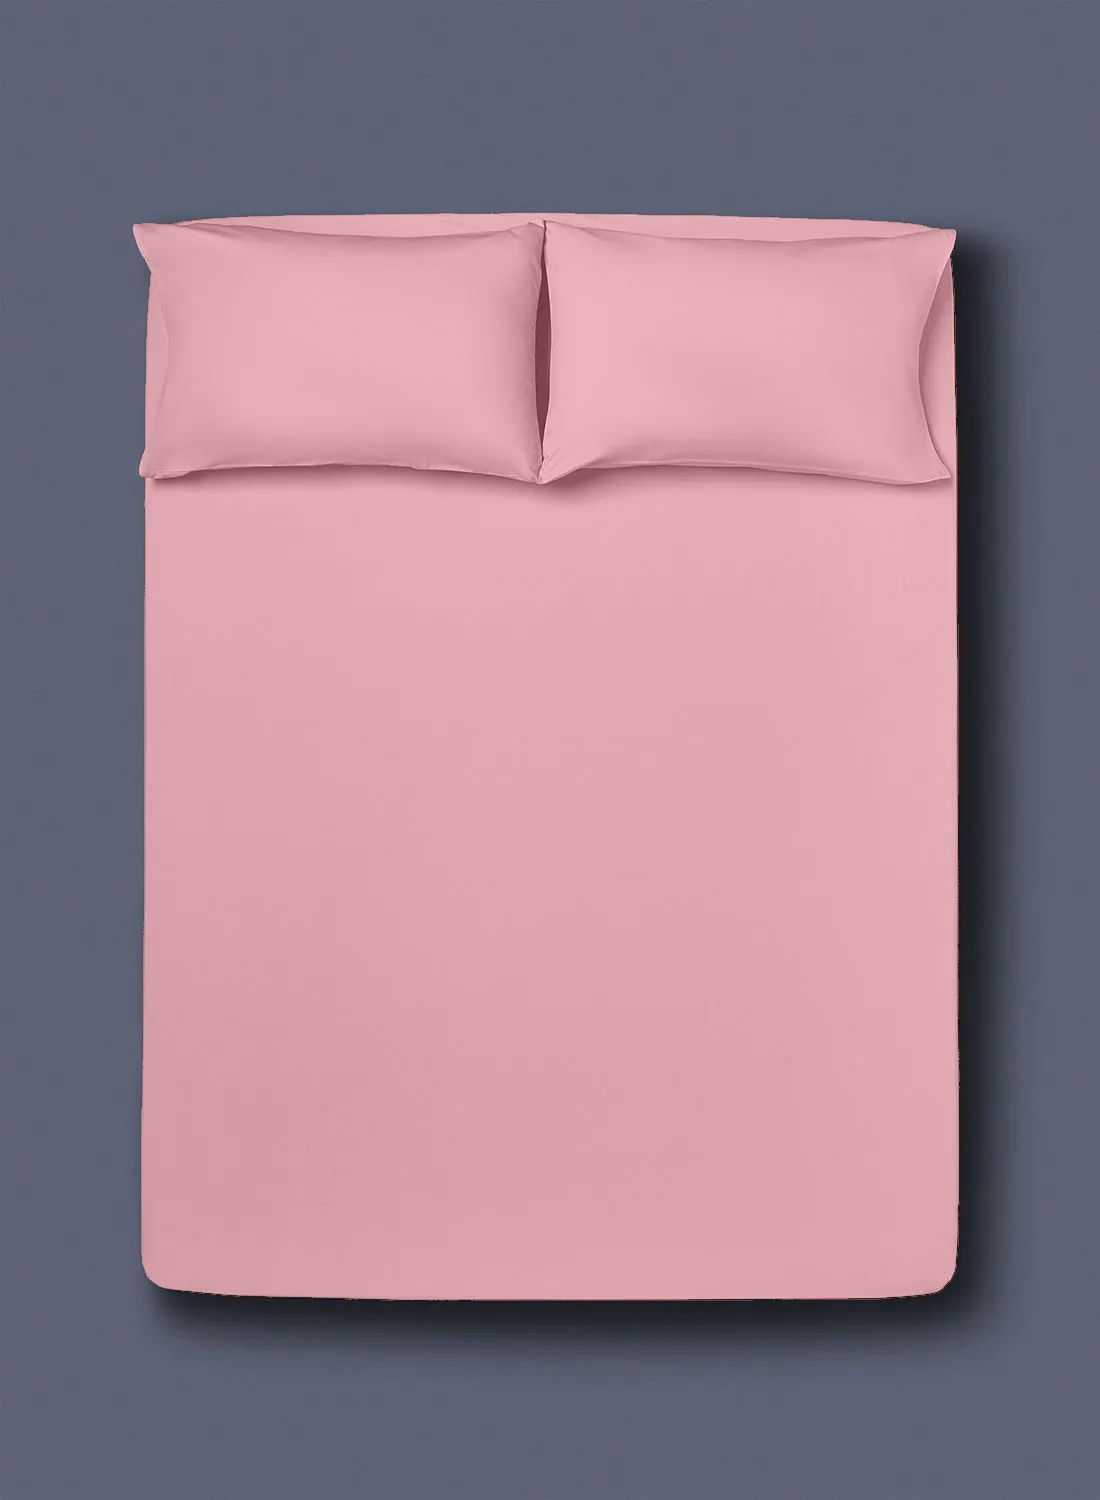 Amal Fitted Bedsheet Set Single Size  100% Cotton Light Weight Everyday Use 144 TC High Quality 1 Bed Sheet And 2 Pillow Cases Pink Color